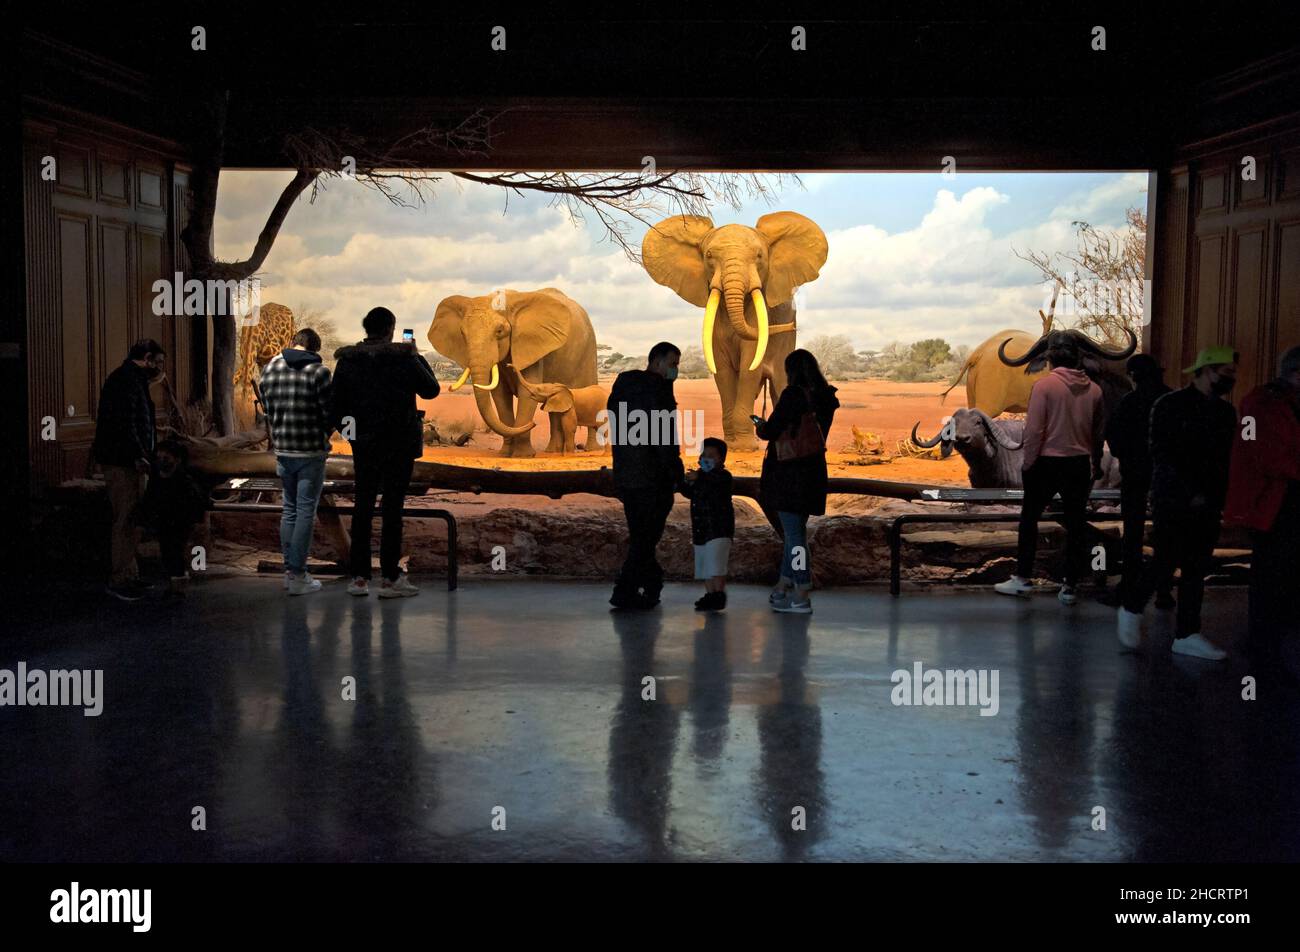 African Elephant diorama at the Museum of Natural History, Los Angeles, CA, USA Stock Photo